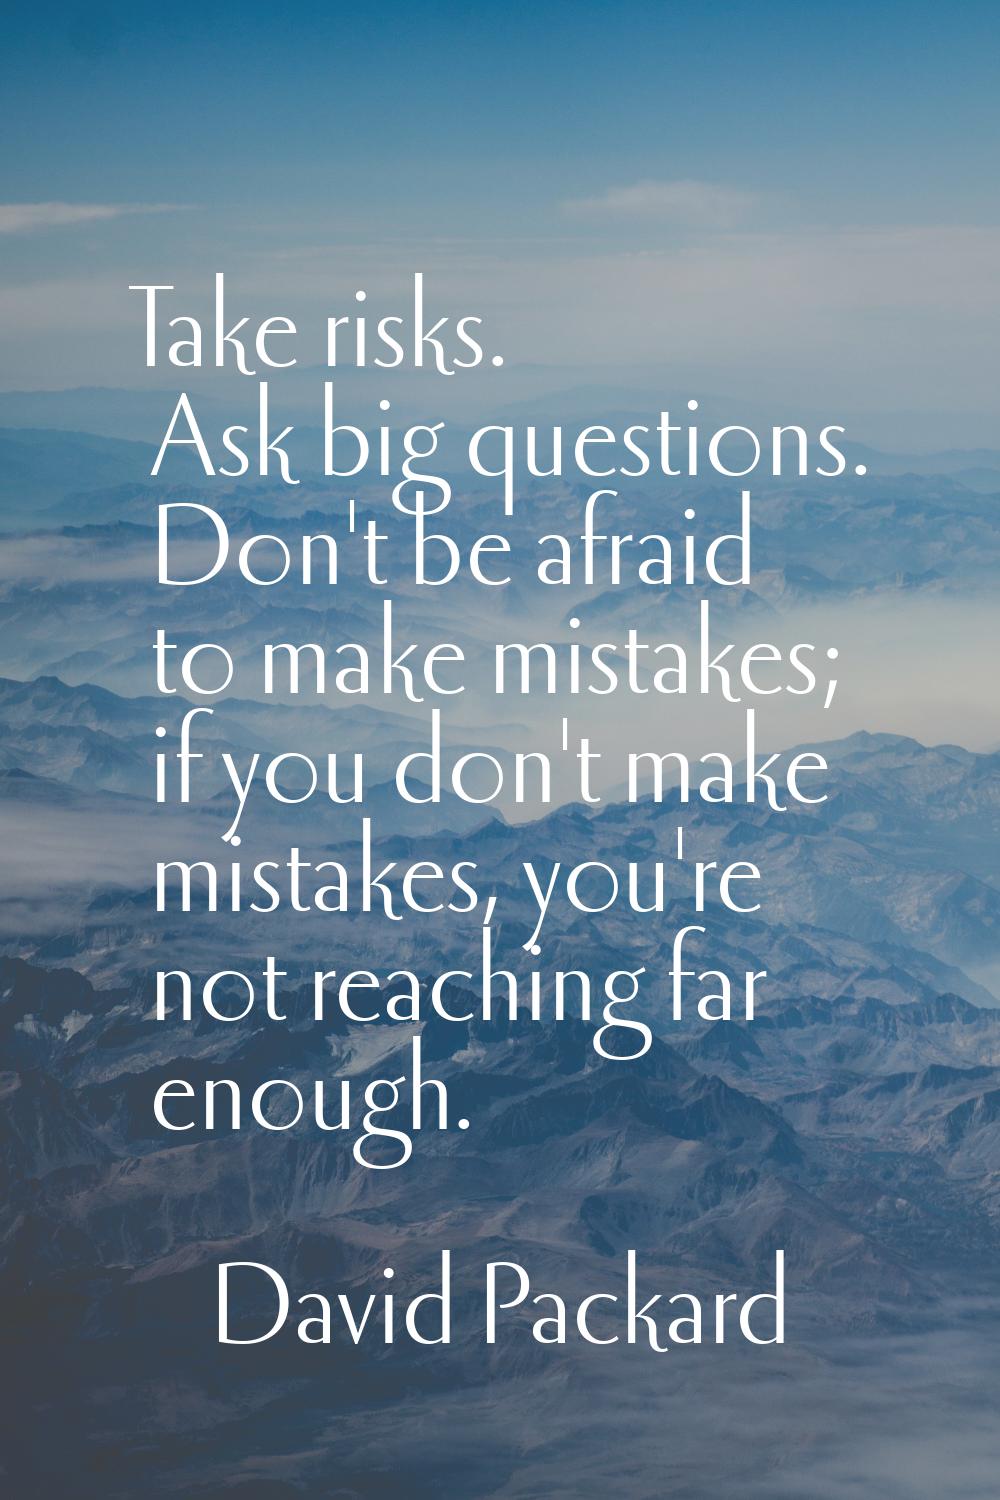 Take risks. Ask big questions. Don't be afraid to make mistakes; if you don't make mistakes, you're